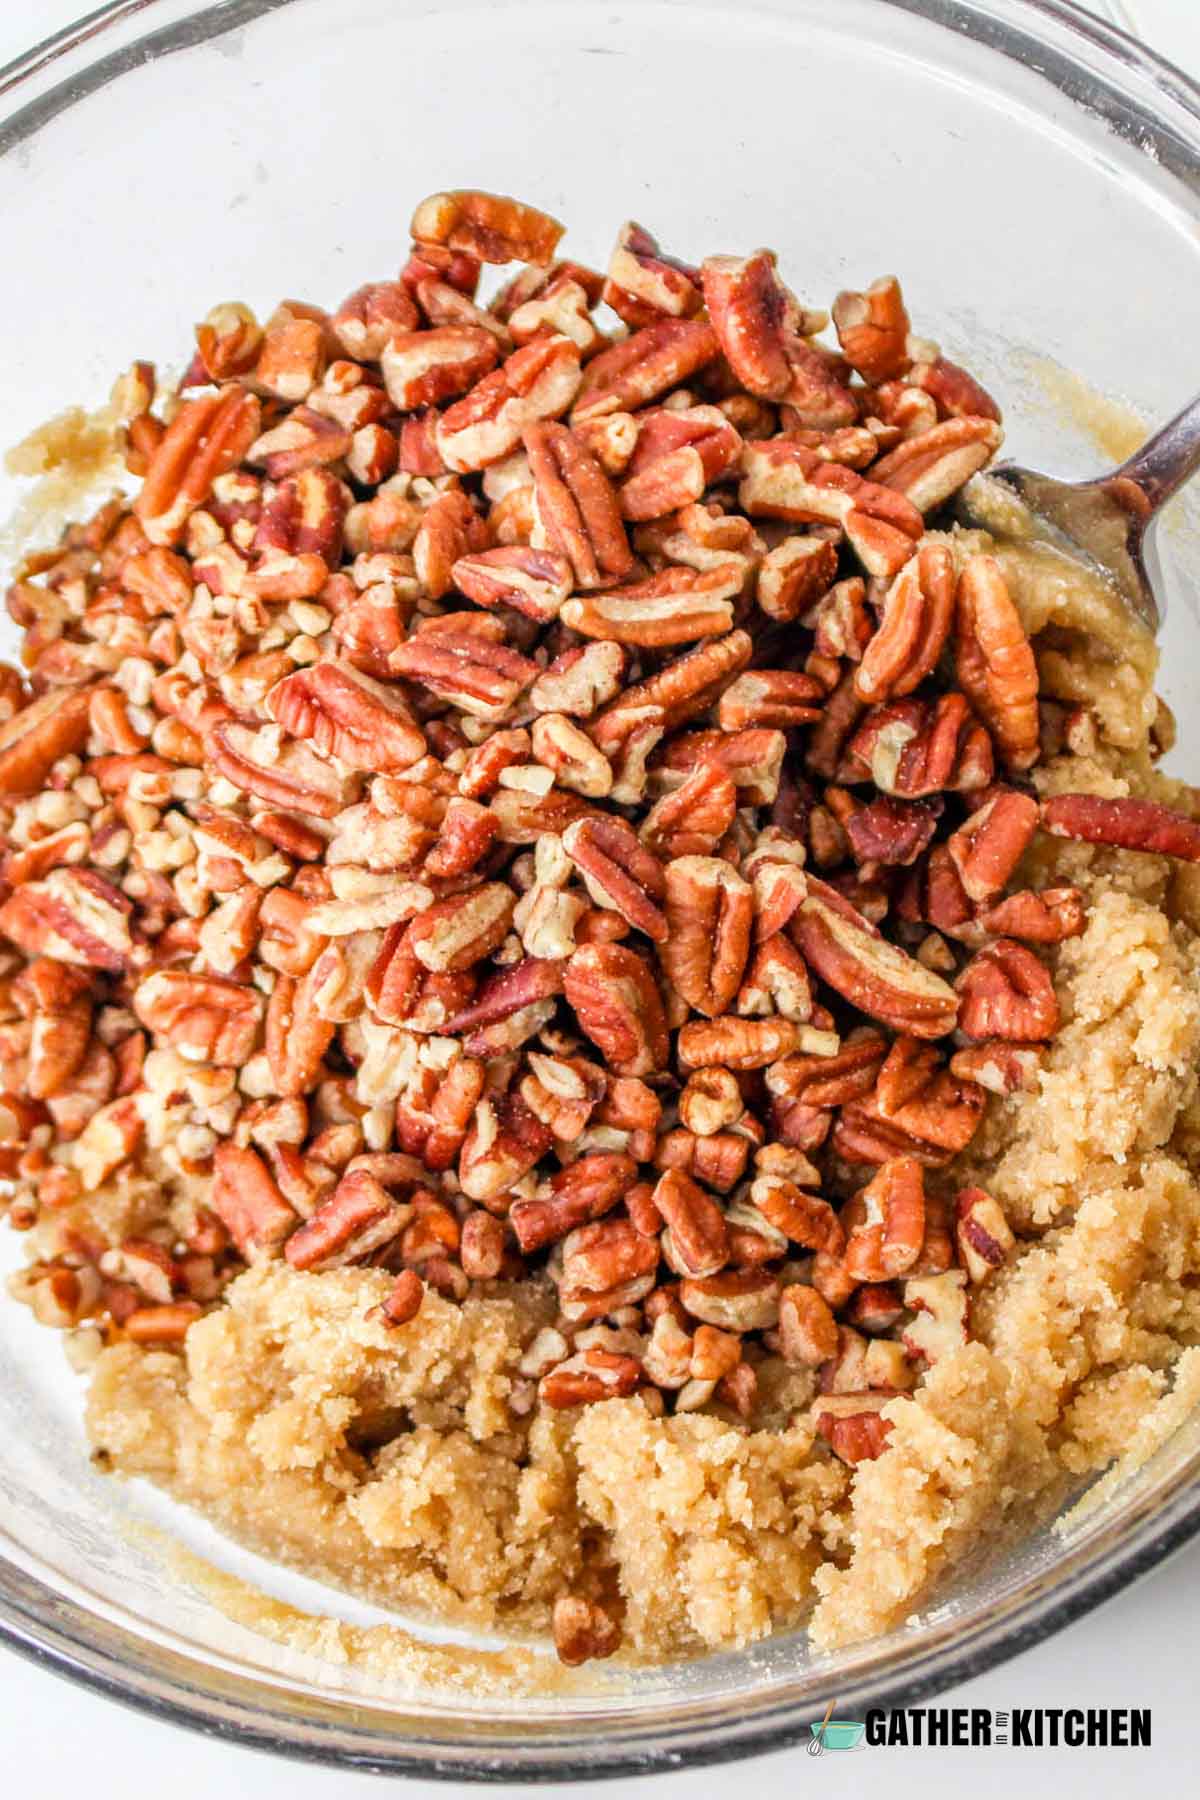 Casserole mixture topped with pecans.